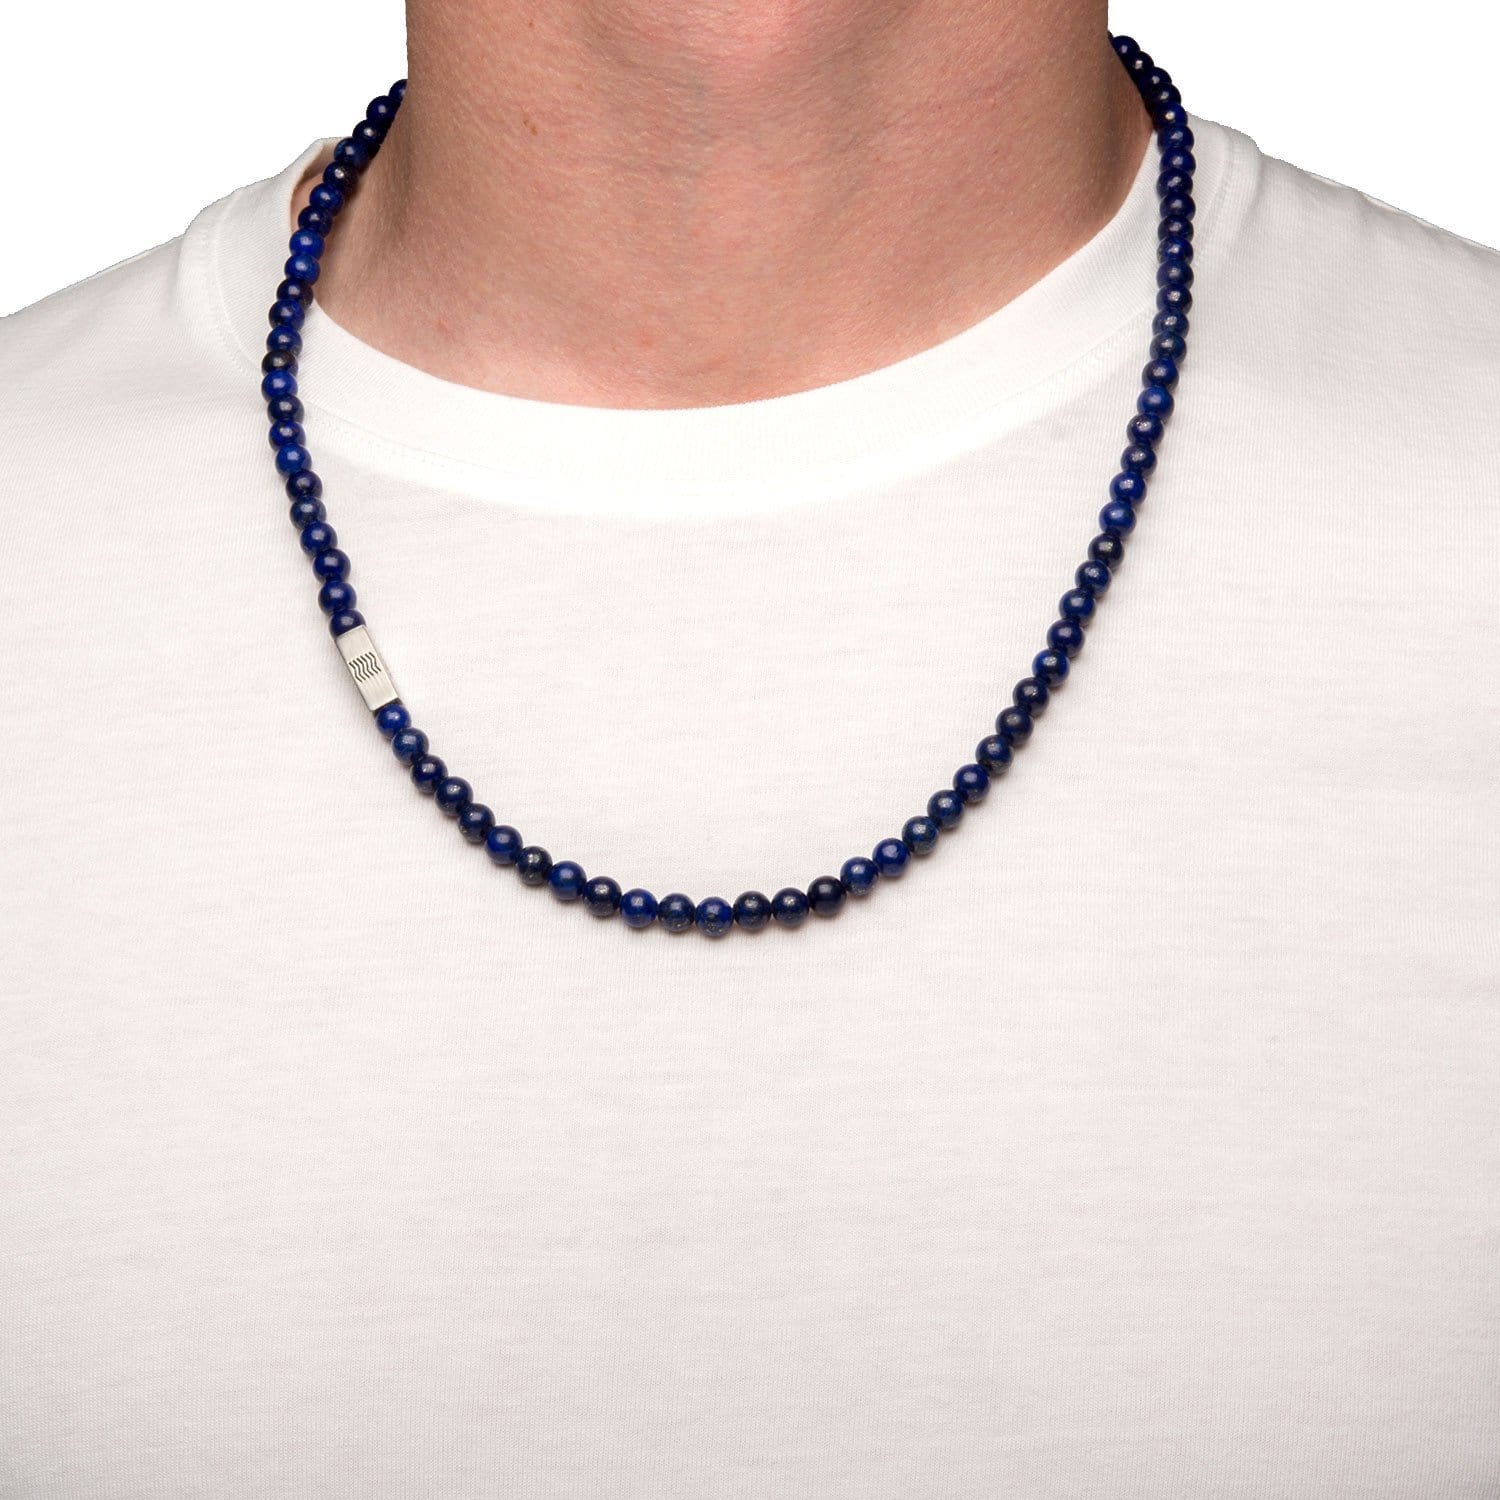 INOX JEWELRY Chains Silver Stainless Steel Blue Lapis Gemstone Necklace NKEL02